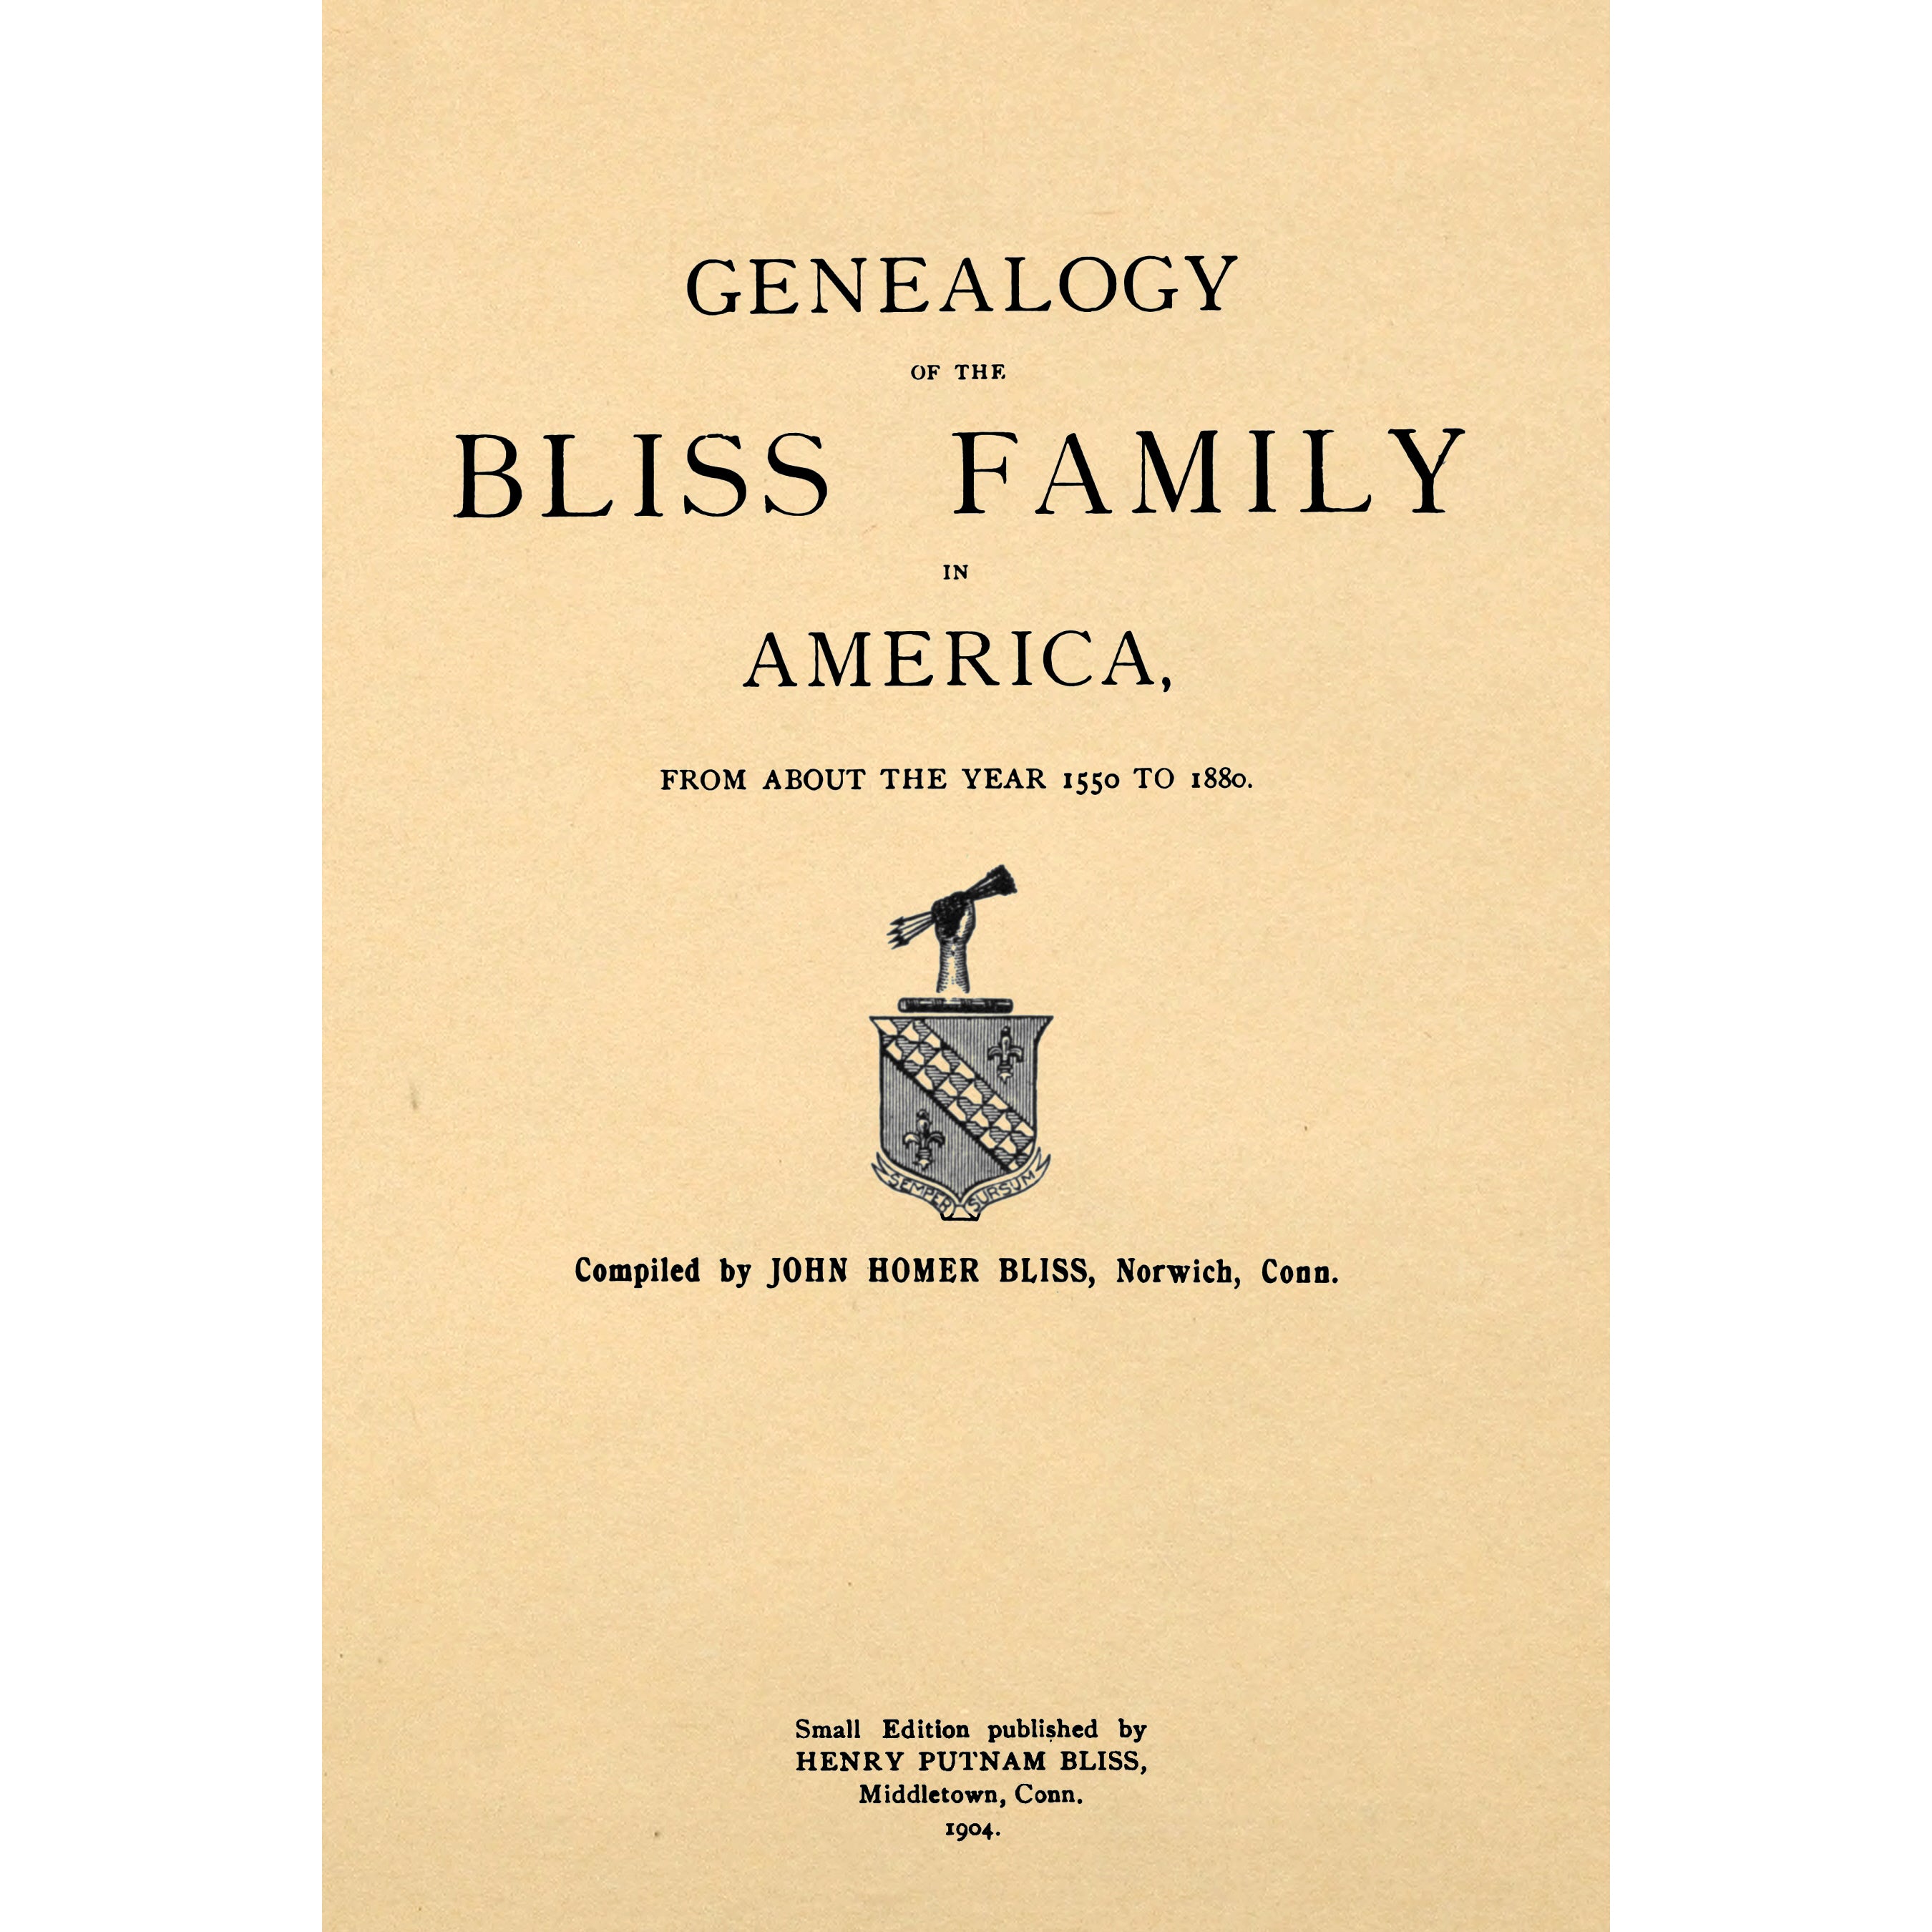 Genealogy of the Bliss family in America - Small edition